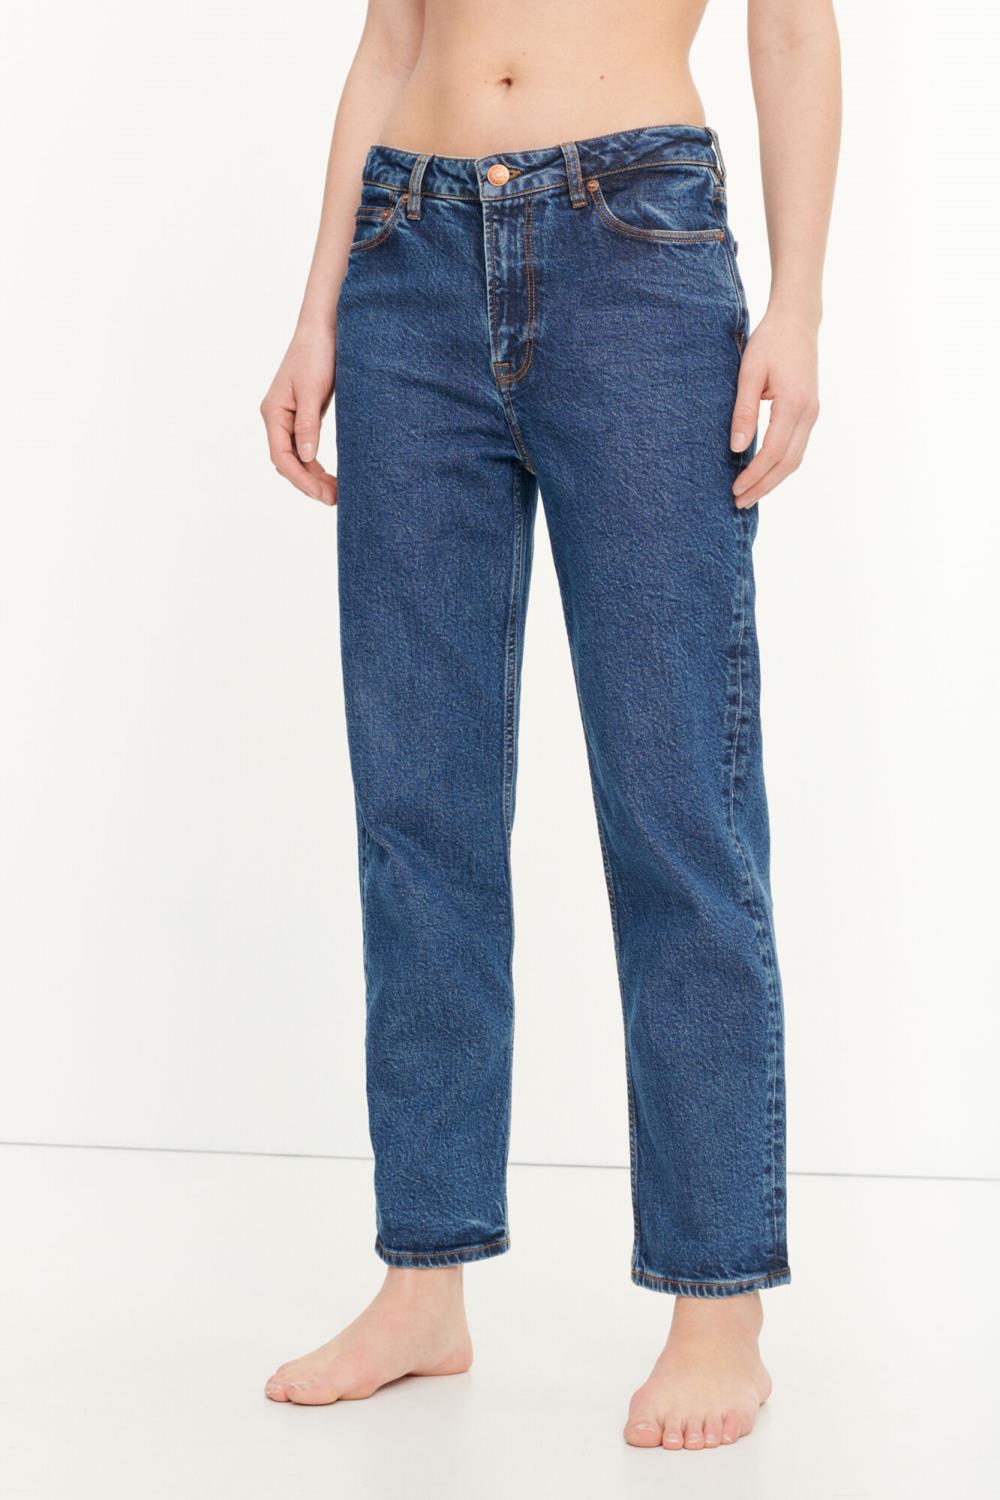 Marianne Jeans 11358